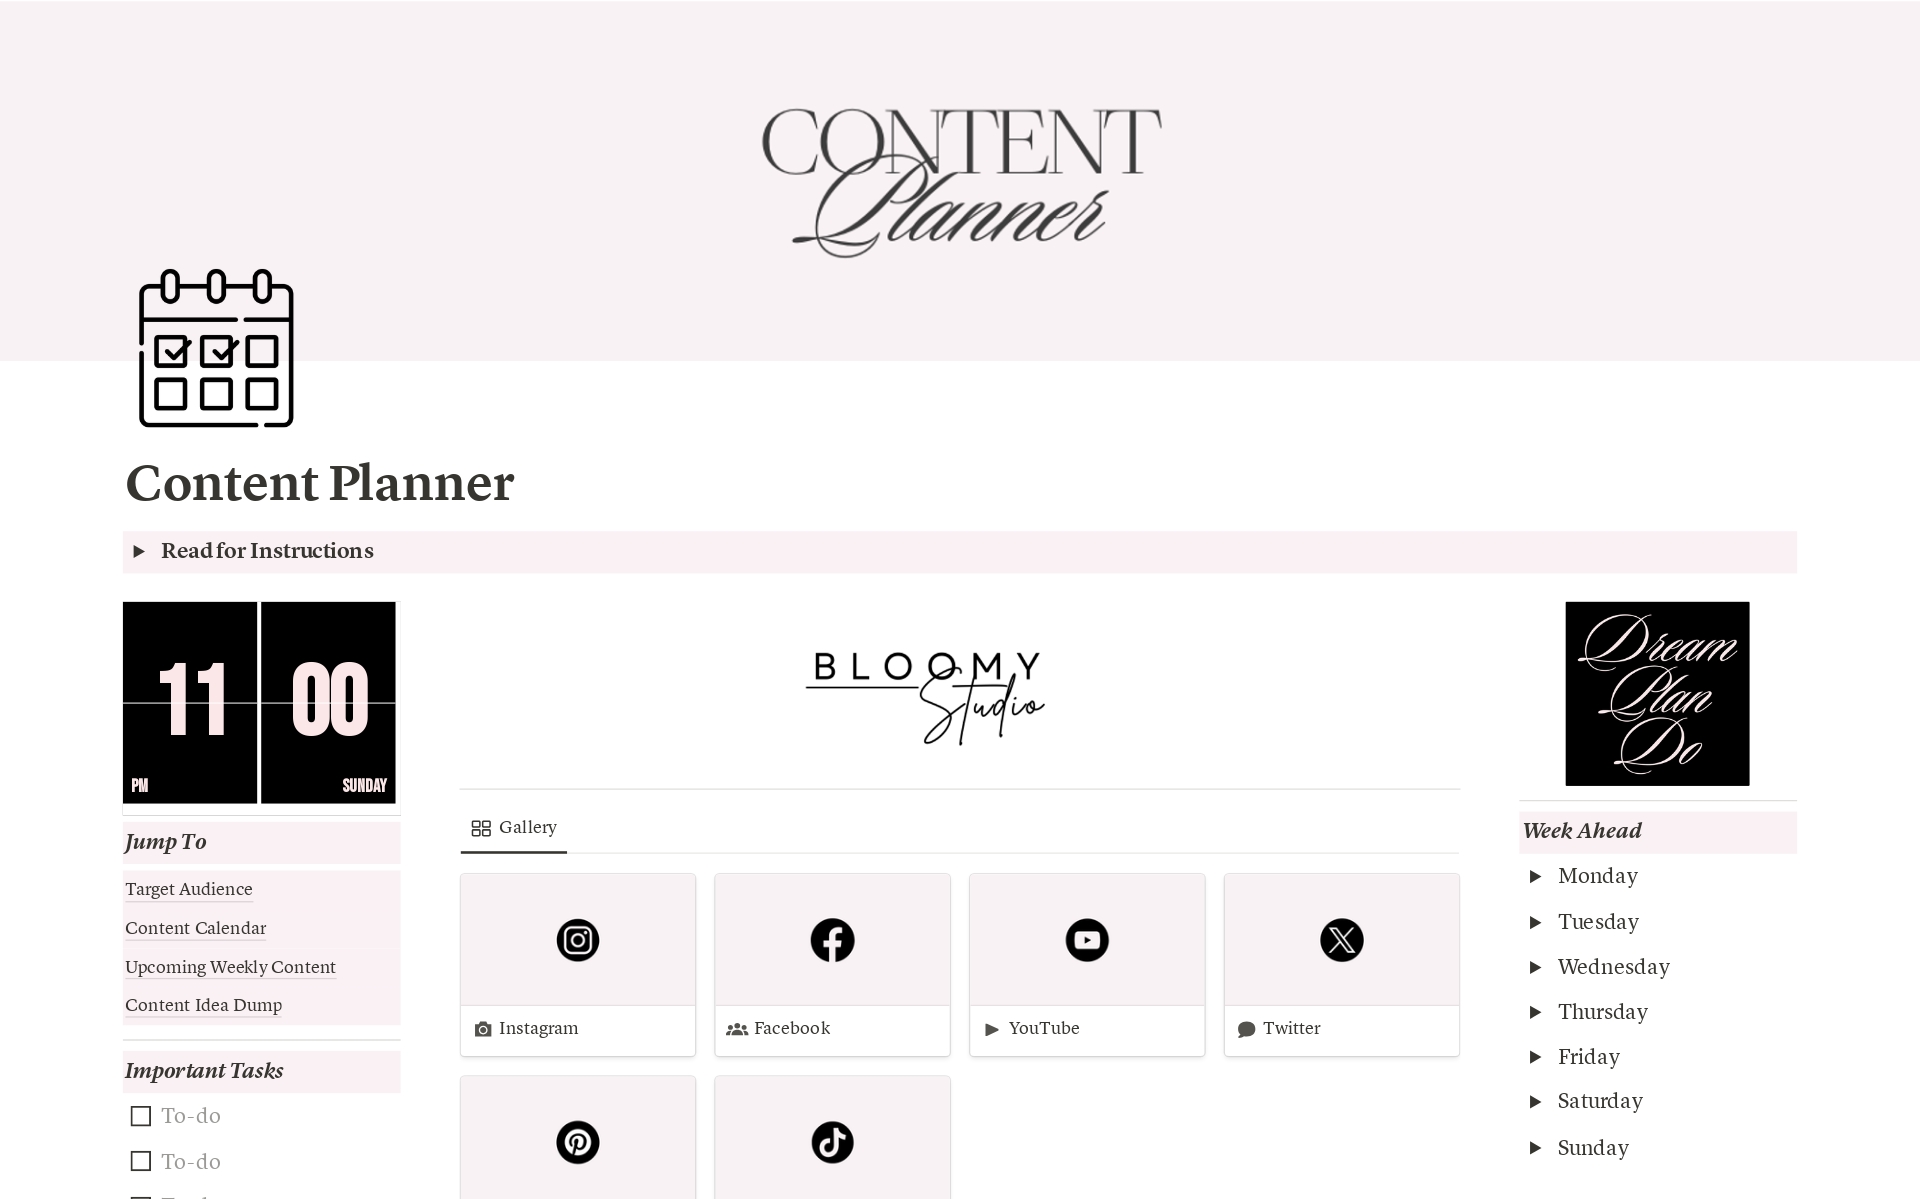 Maximize social media success with our Content Planner: tailor content across platforms, manage captions & visuals, organize workflow, analyze audience, brainstorm ideas, set goals. Elevate your strategy today!